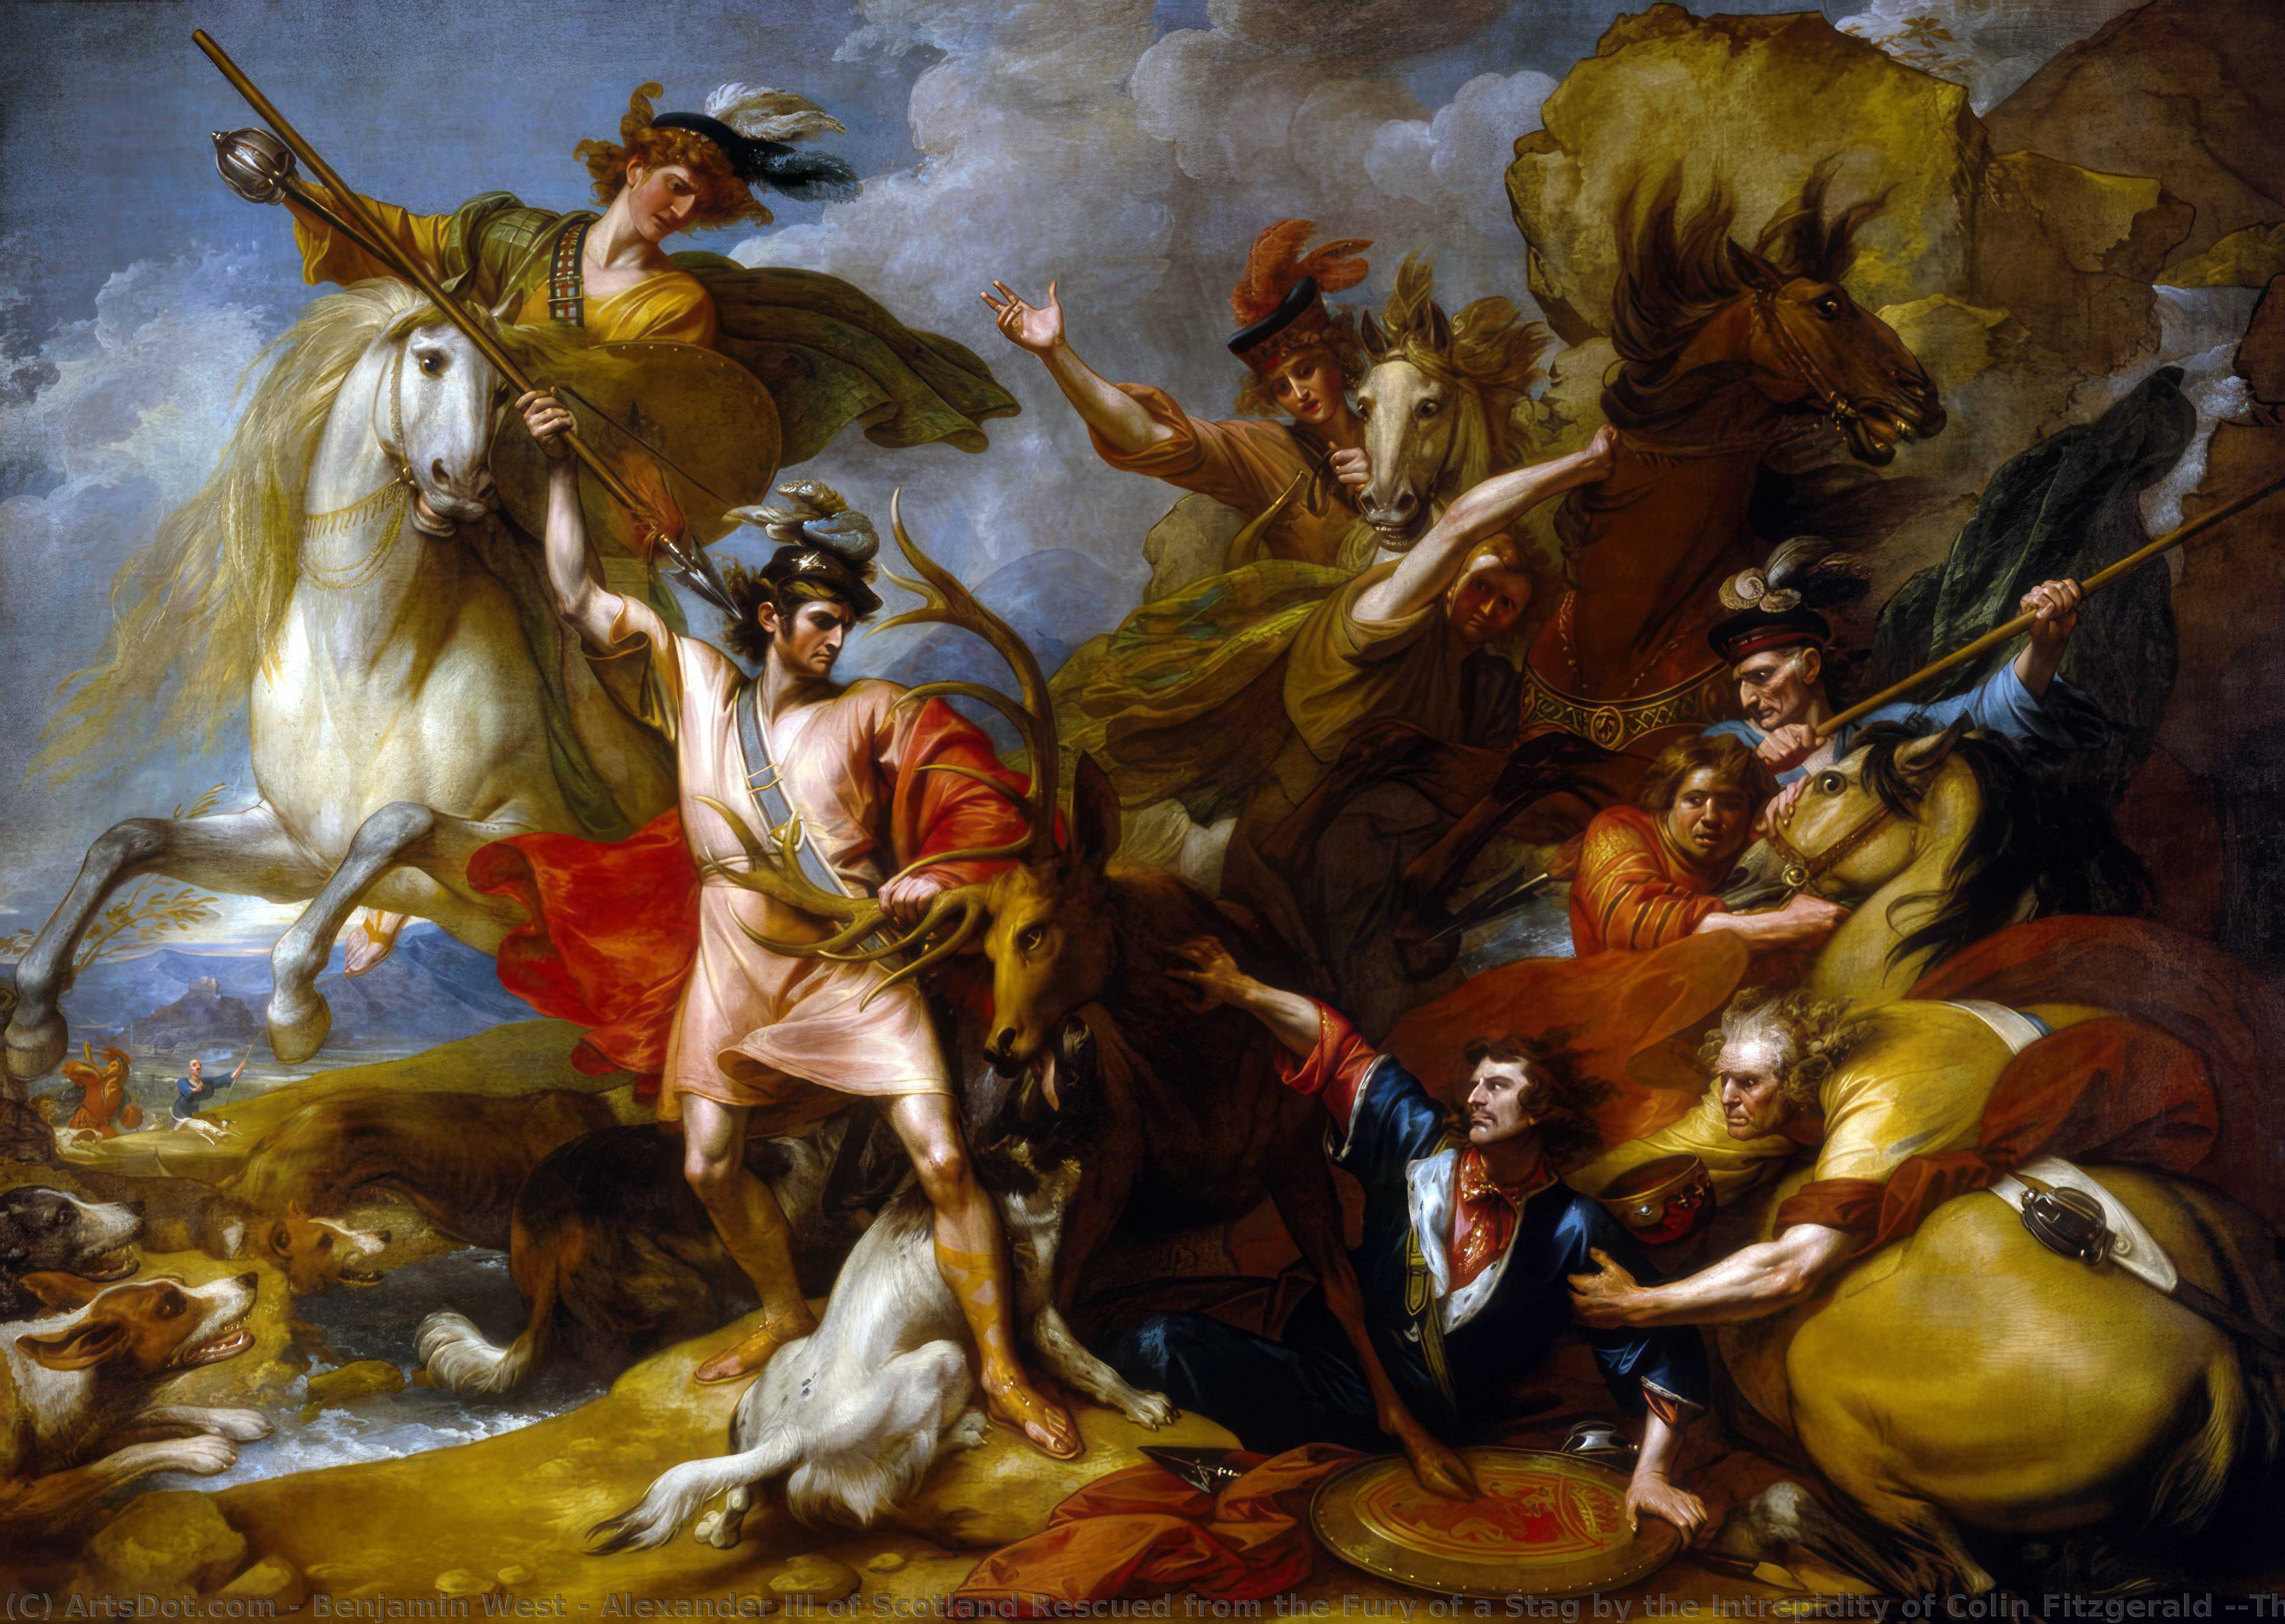 WikiOO.org - Encyclopedia of Fine Arts - Festés, Grafika Benjamin West - Alexander III of Scotland Rescued from the Fury of a Stag by the Intrepidity of Colin Fitzgerald ('The Death of the Stag')